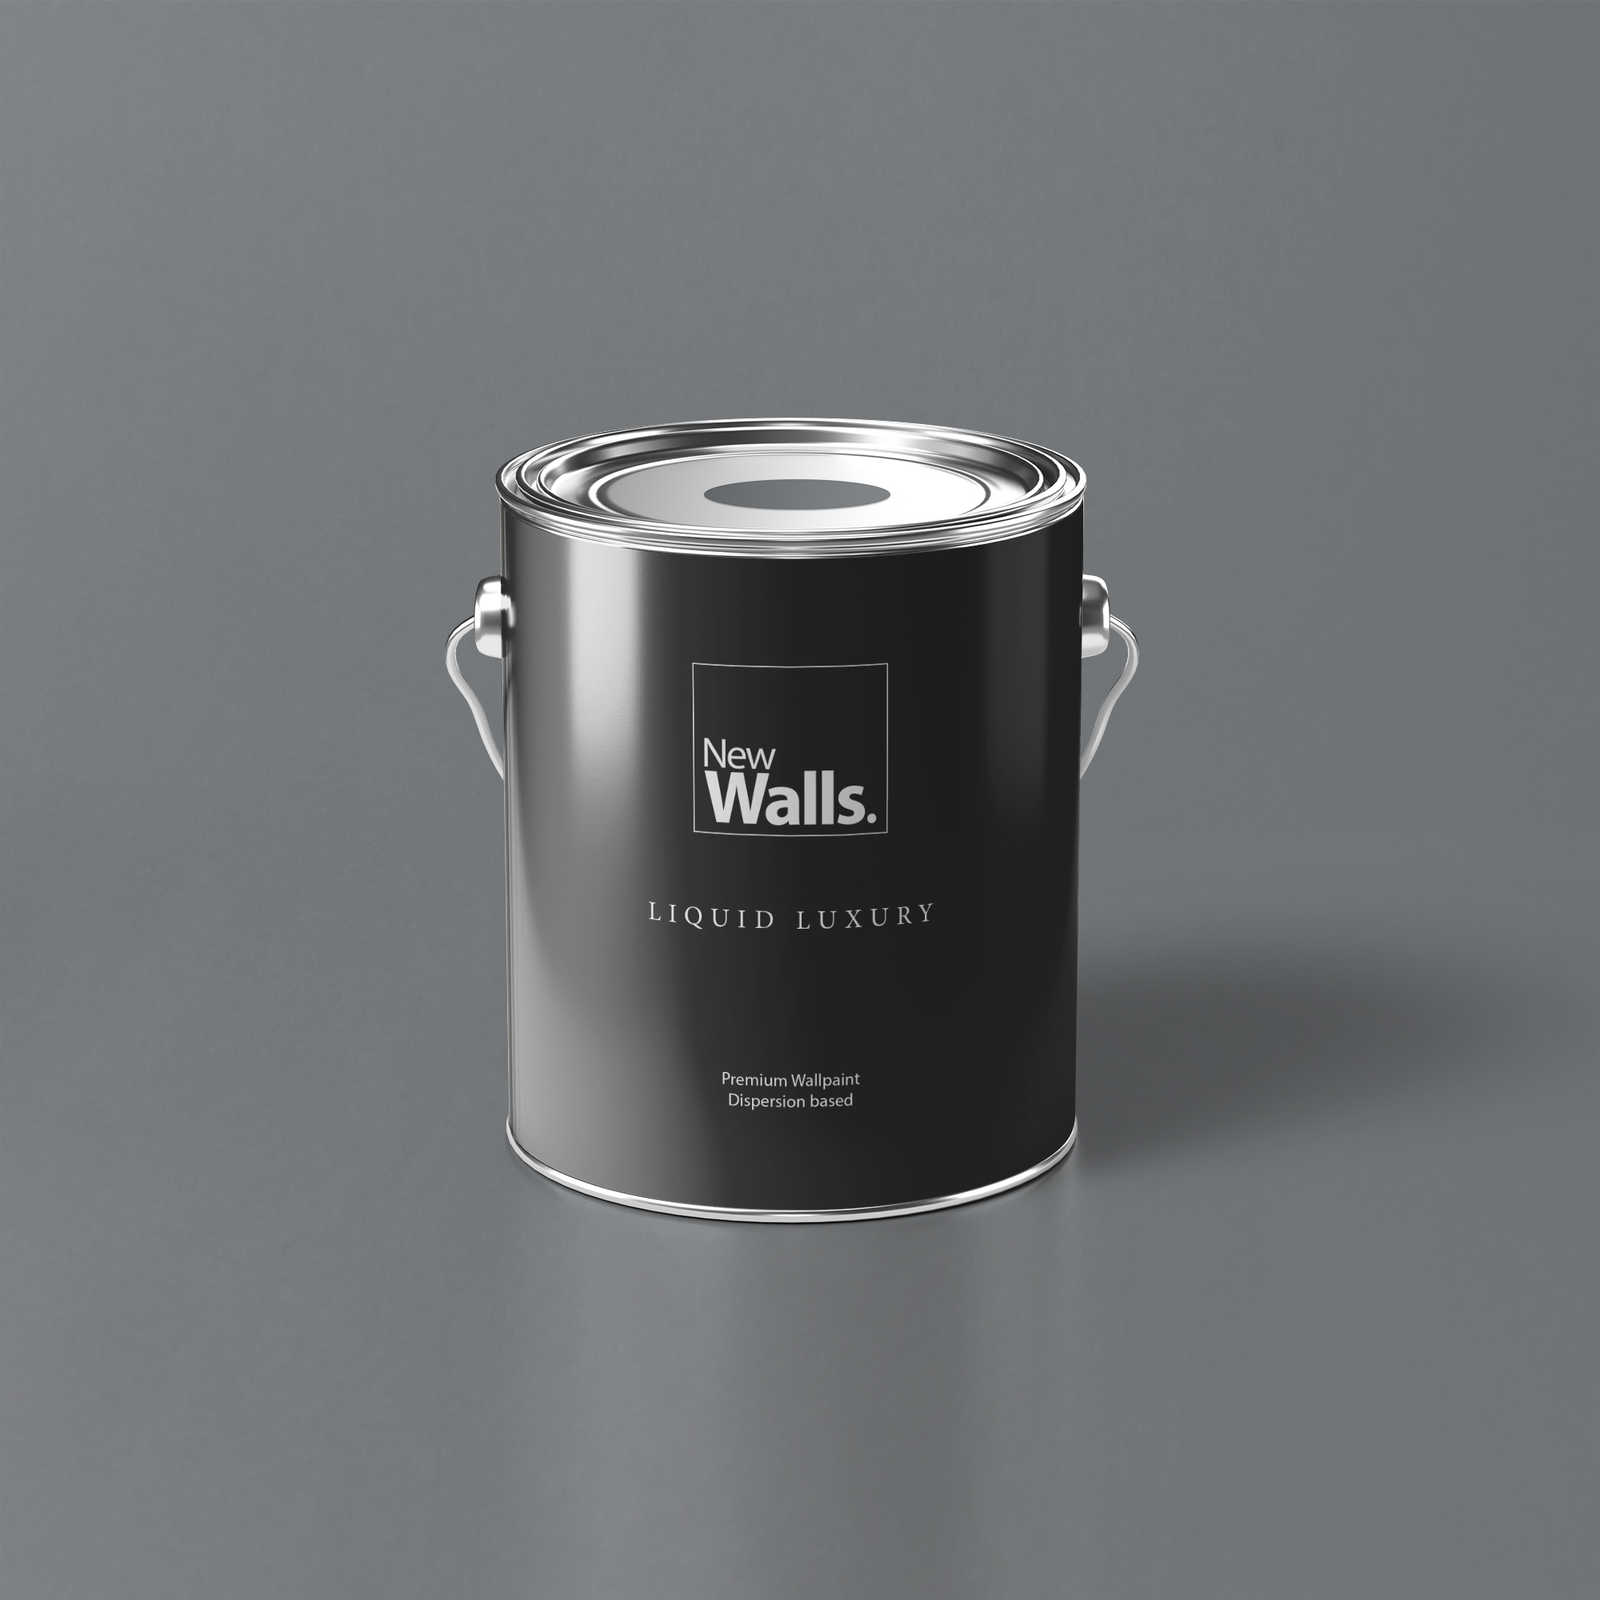 Premium Wall Paint Soothing Concrete Grey »Industrial Grey« NW104 – 5 litre
